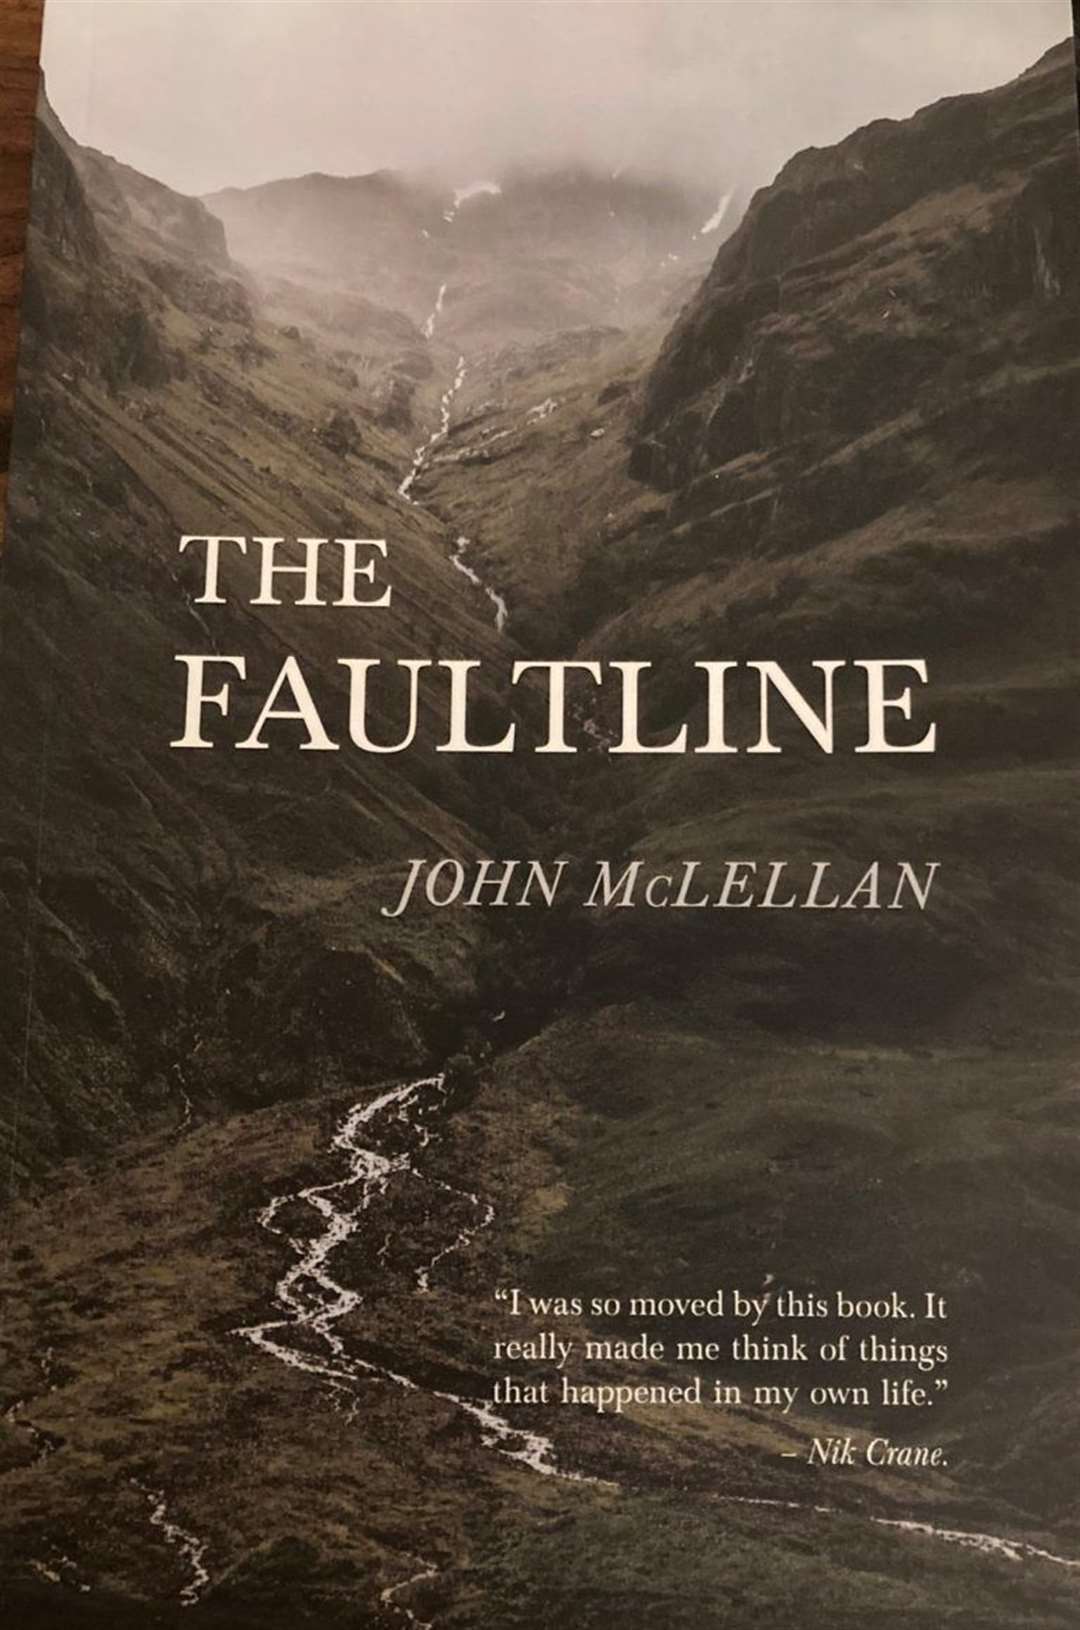 The Faultline.